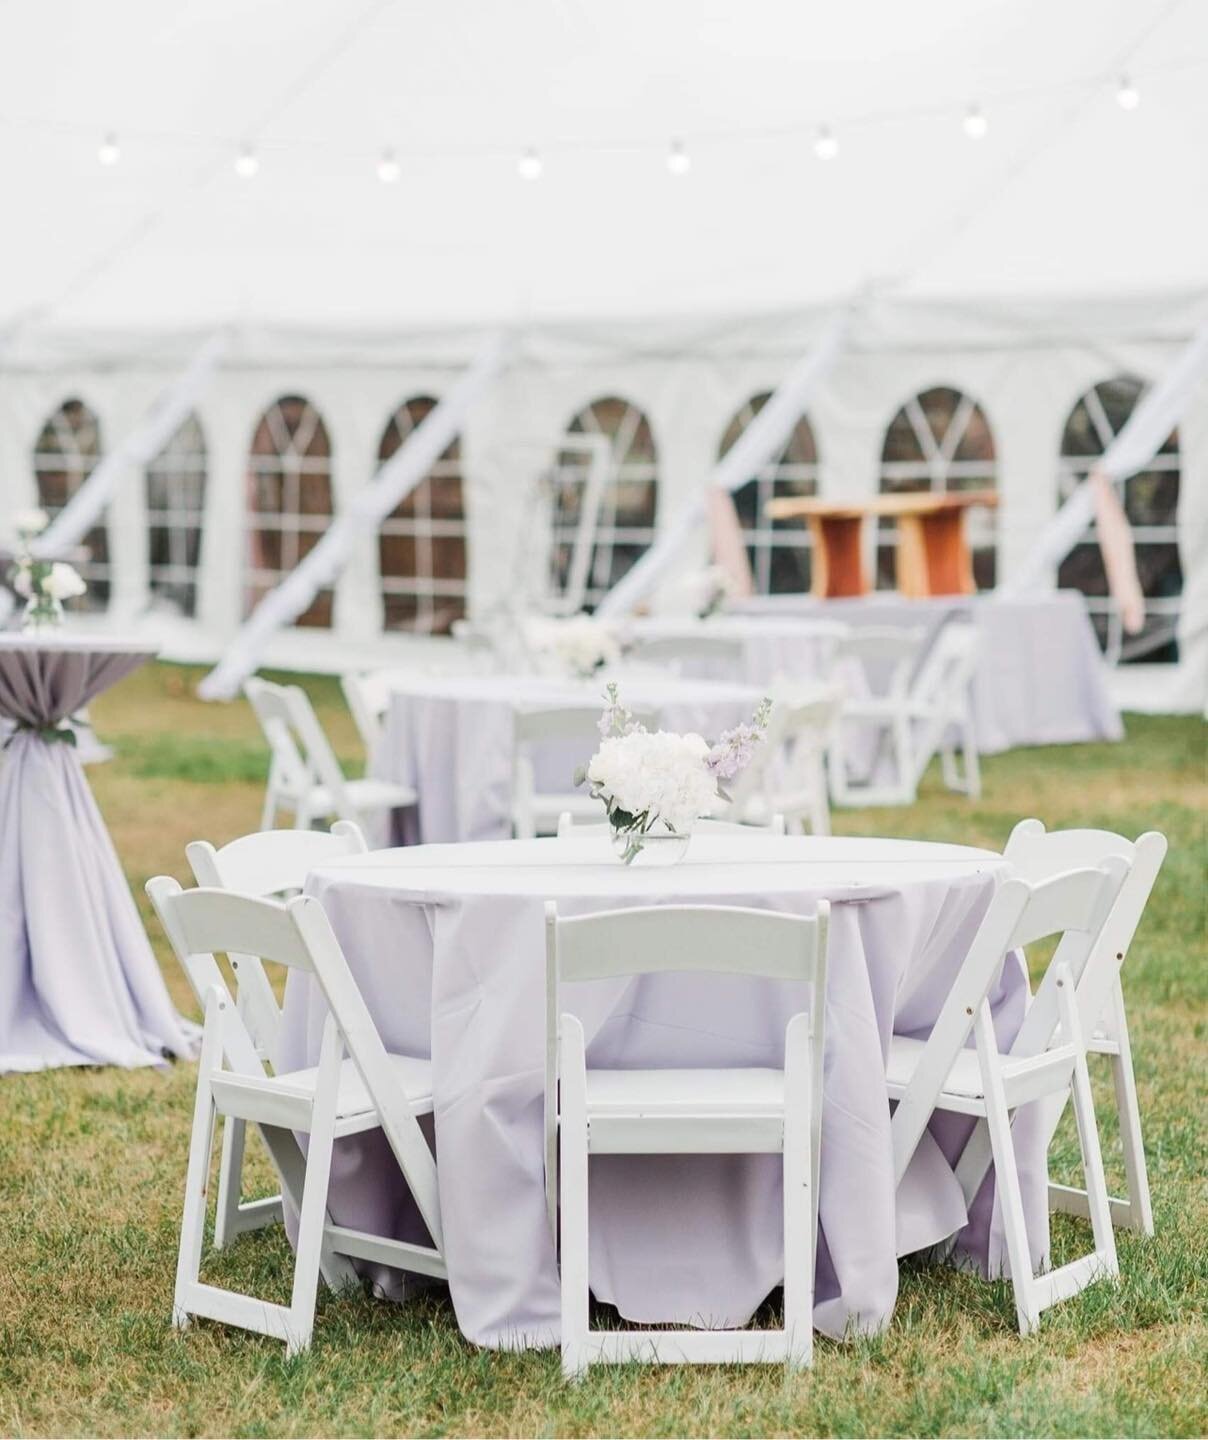 Looking for tents, tables, and chairs? Oh my! Look no further! We rent them all! 

  #rentals #tentrental #eventplanning #partyrental #partytent #weddingrentals #partyrentalservices #partyplanning #OcalaFlorida